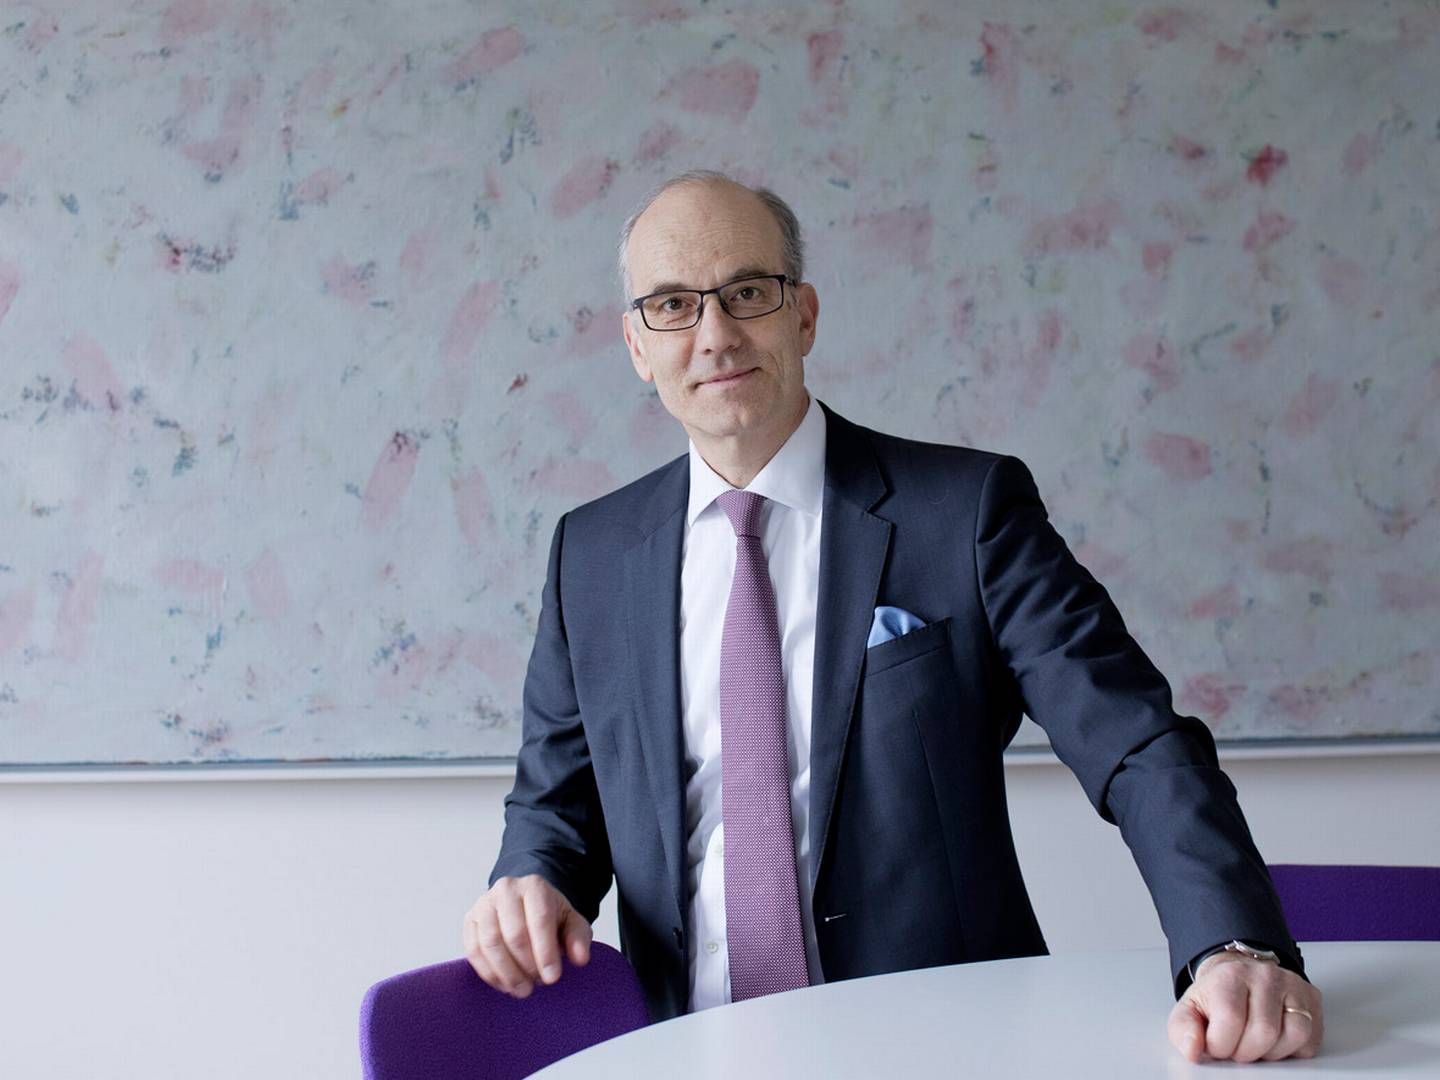 Timo Löyttyniemi is the CEO of FInland's state pension fund (VER). | Foto: PR / VER